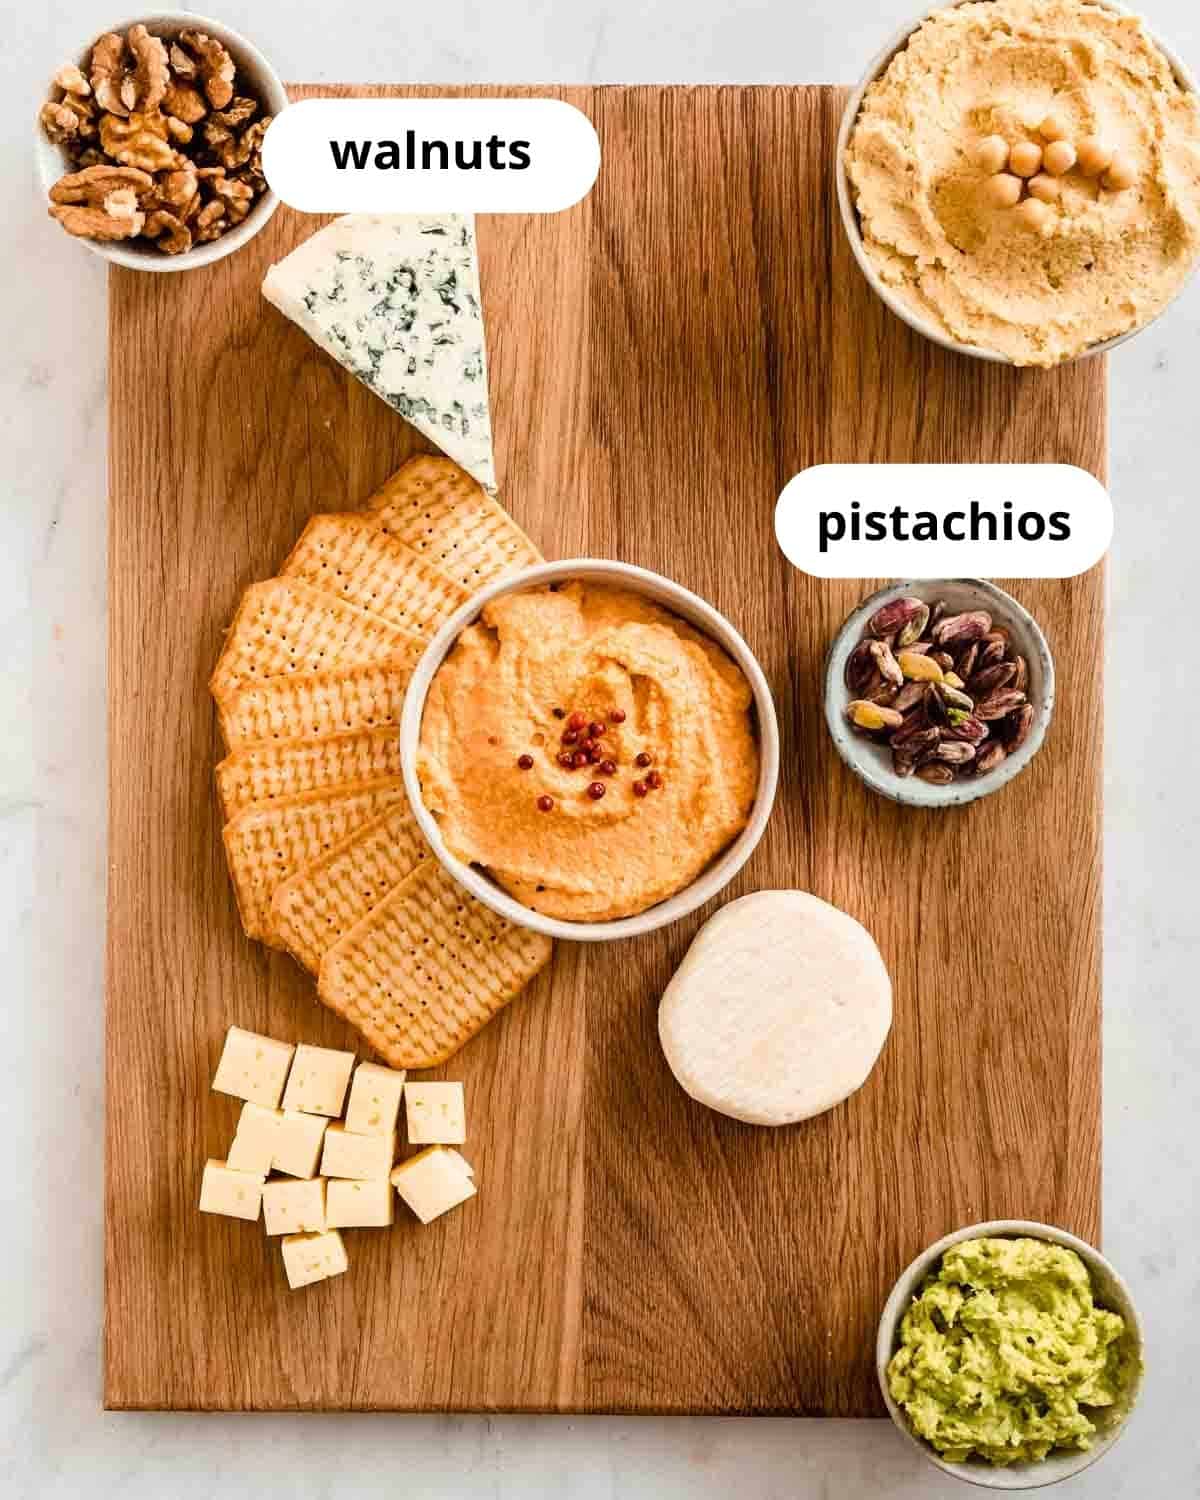 cutting board with hummus, a spicy spread, guacamole, and 3 types of cheese, crackers, walnuts and pistachios on it.